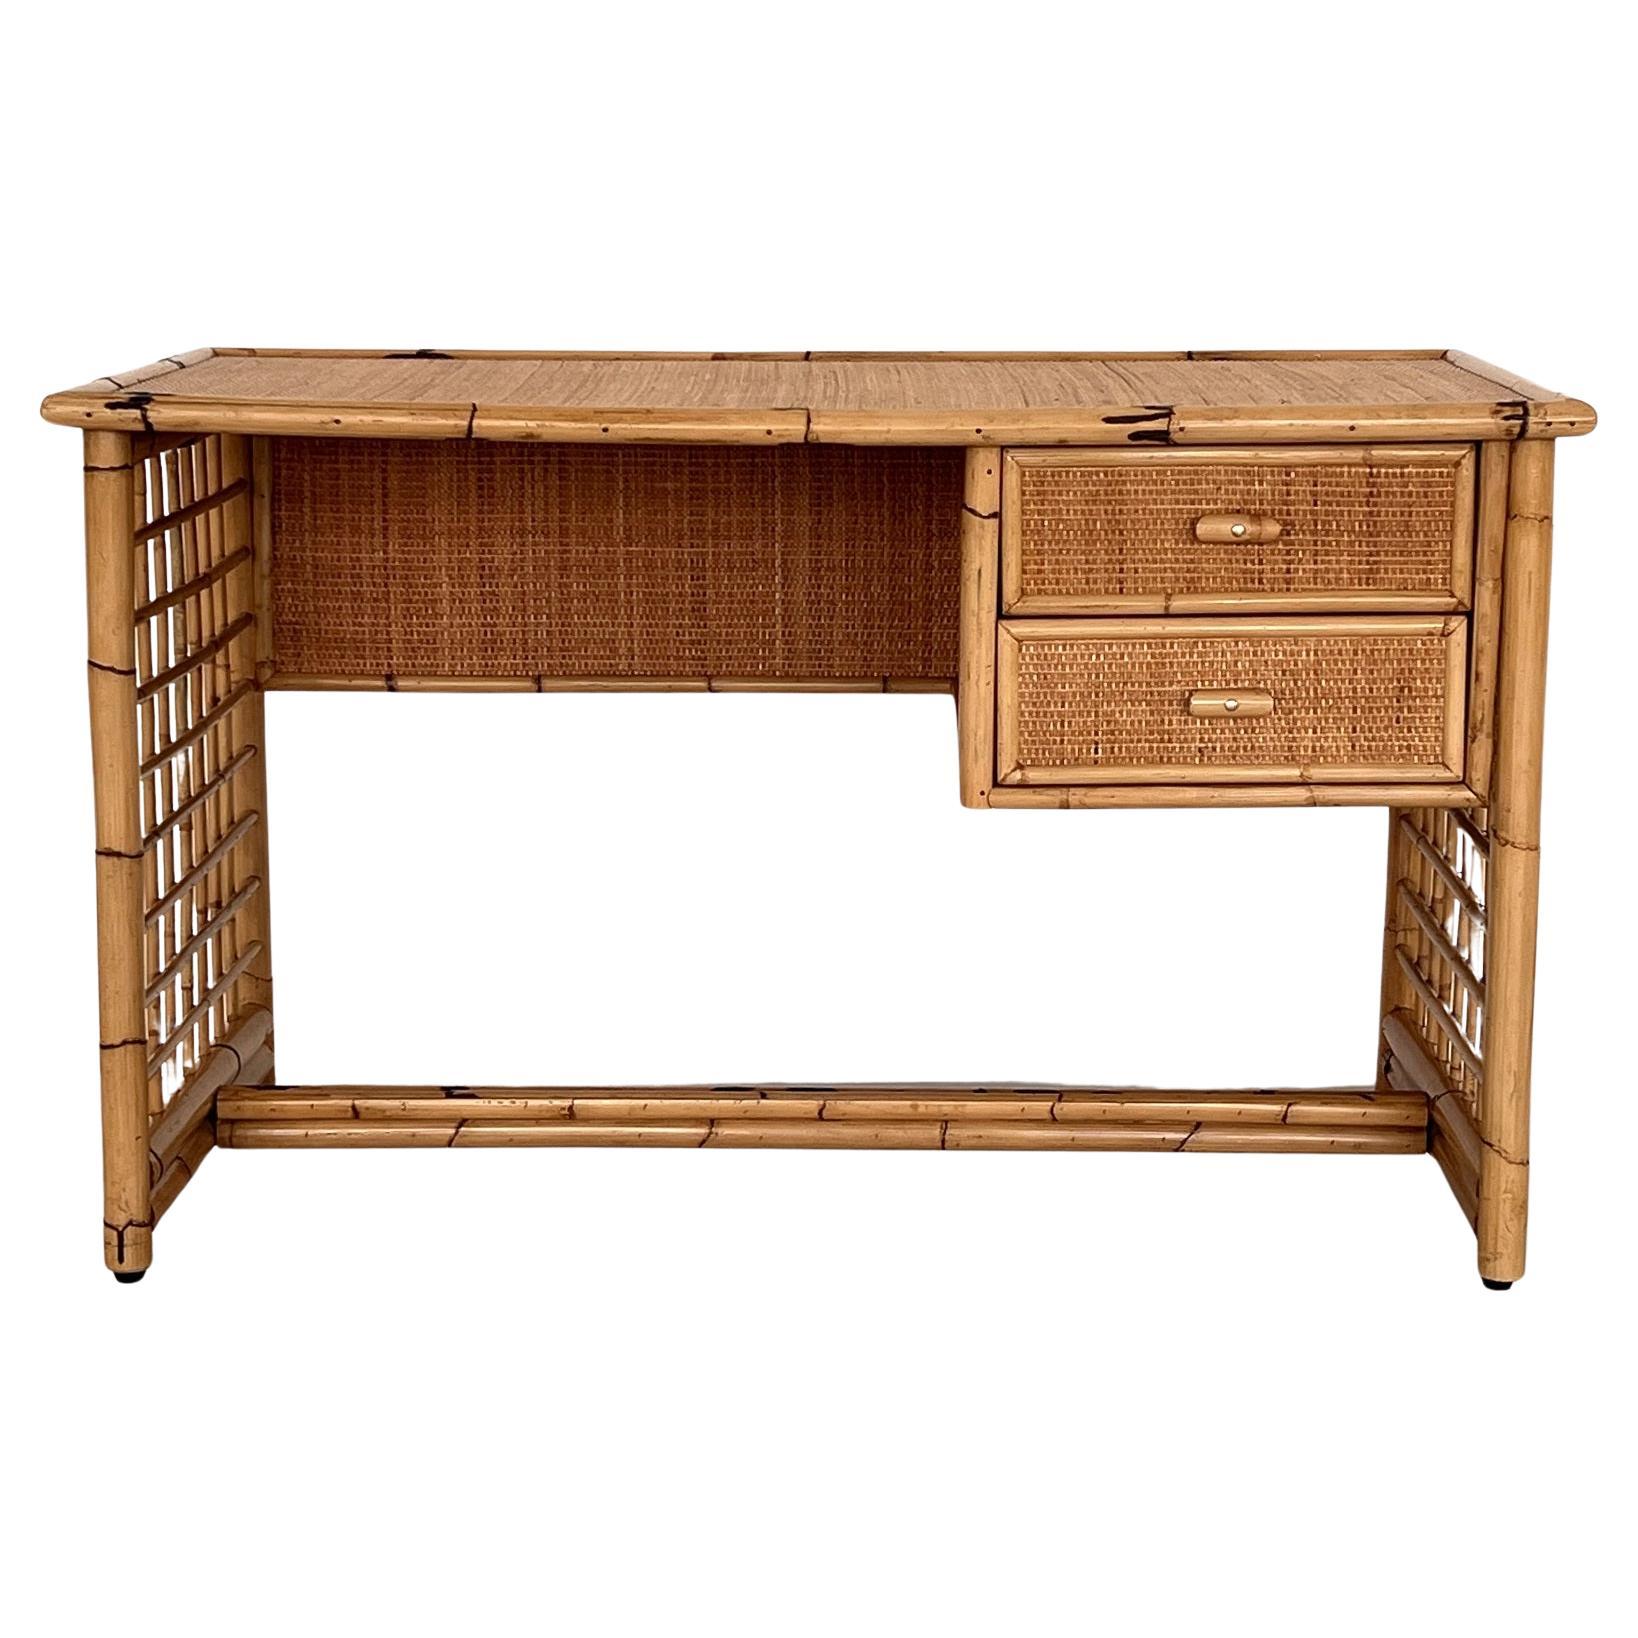 Italian Midcentury Bamboo and Rattan Desk or Vanity with two Drawers, 1970s For Sale